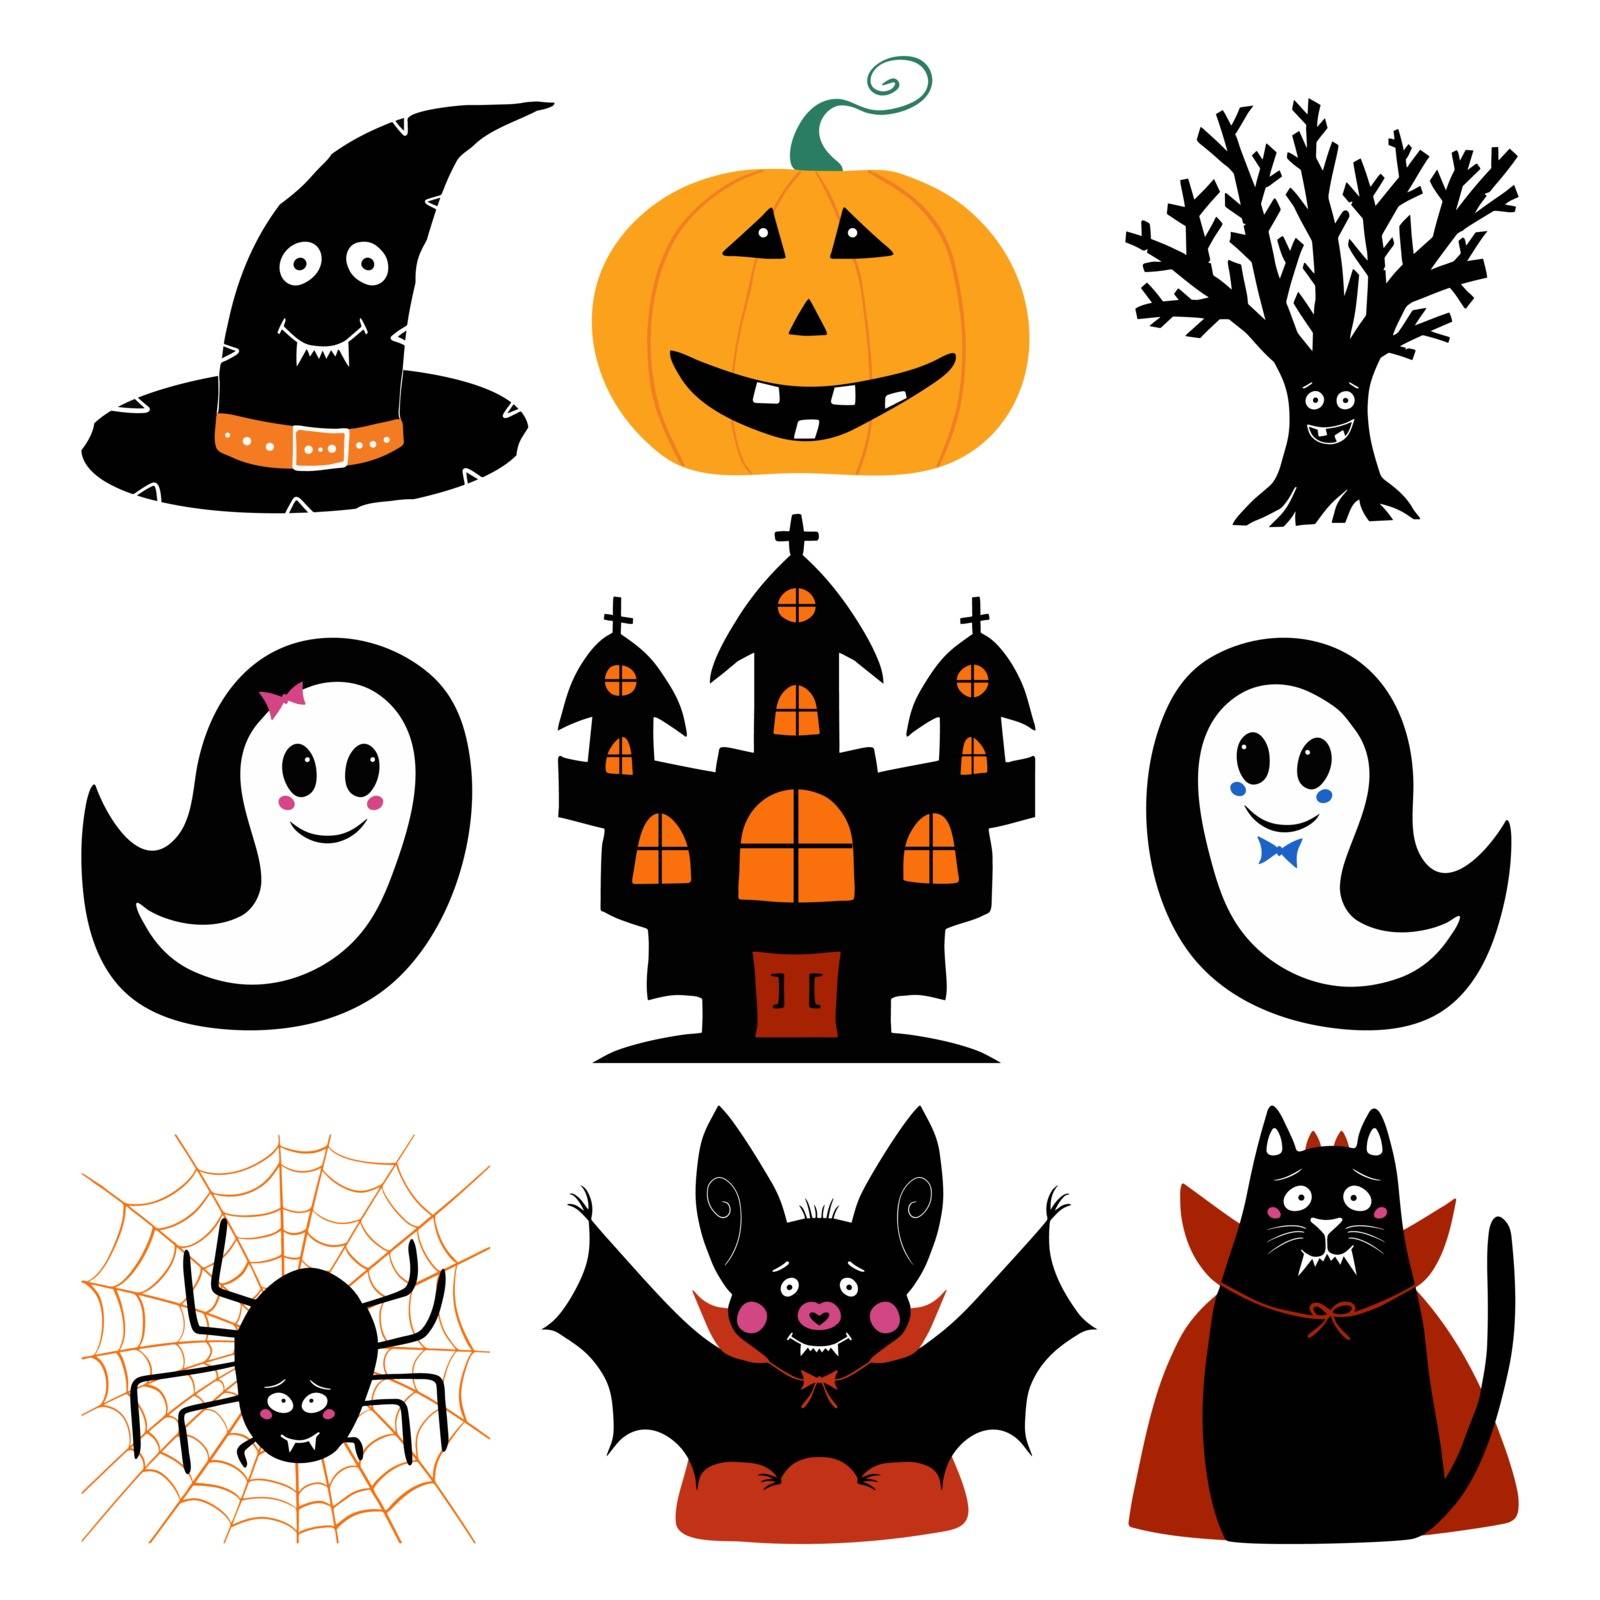 Jack o lantern, witch hat, dry tree, ghost, castle, bat, cat, spider. Halloween characters set. Isolated on white Vector stock illustration